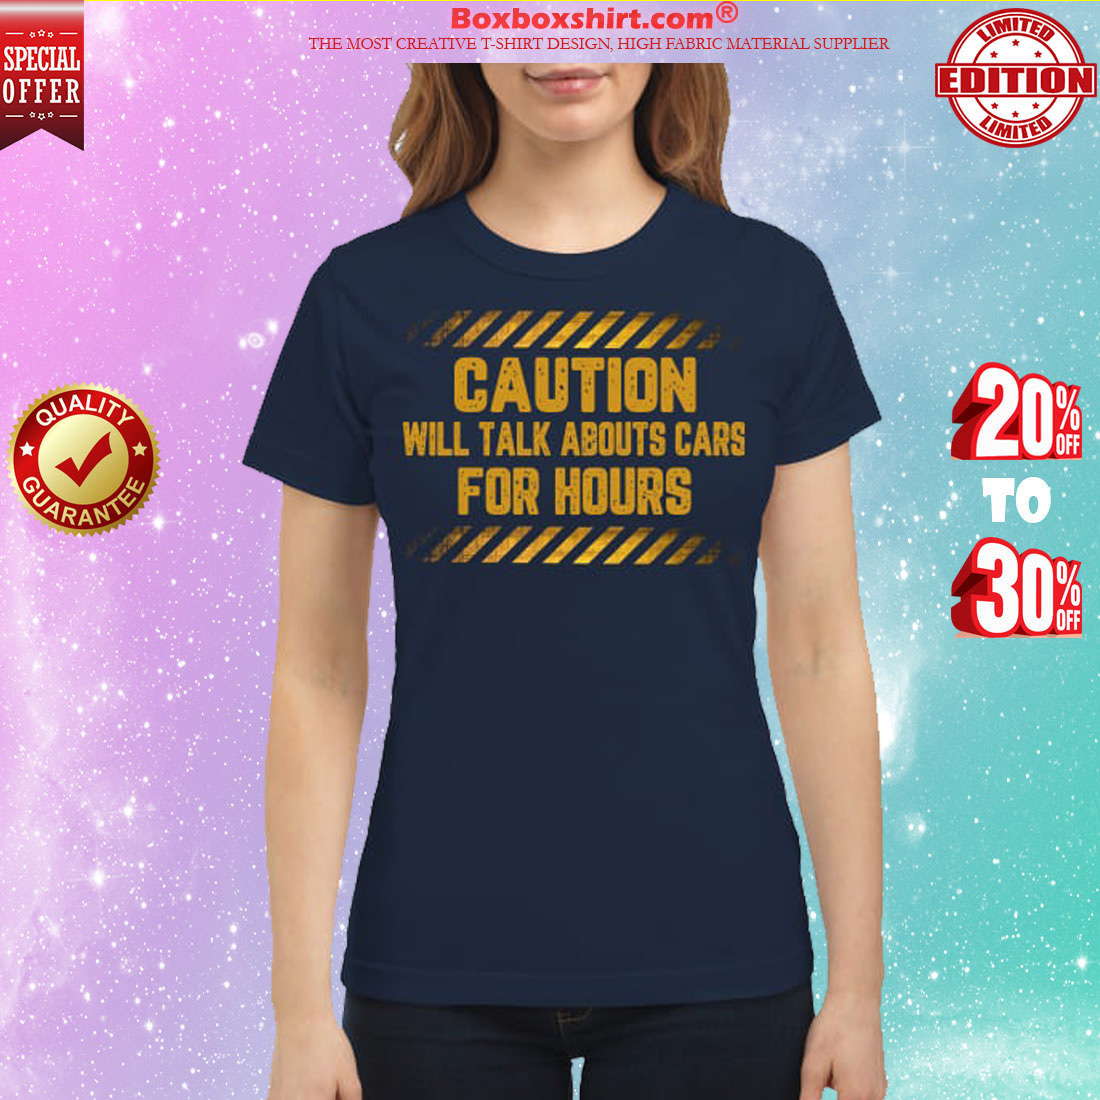 Caution will talk abouts cars for hours classic shirt